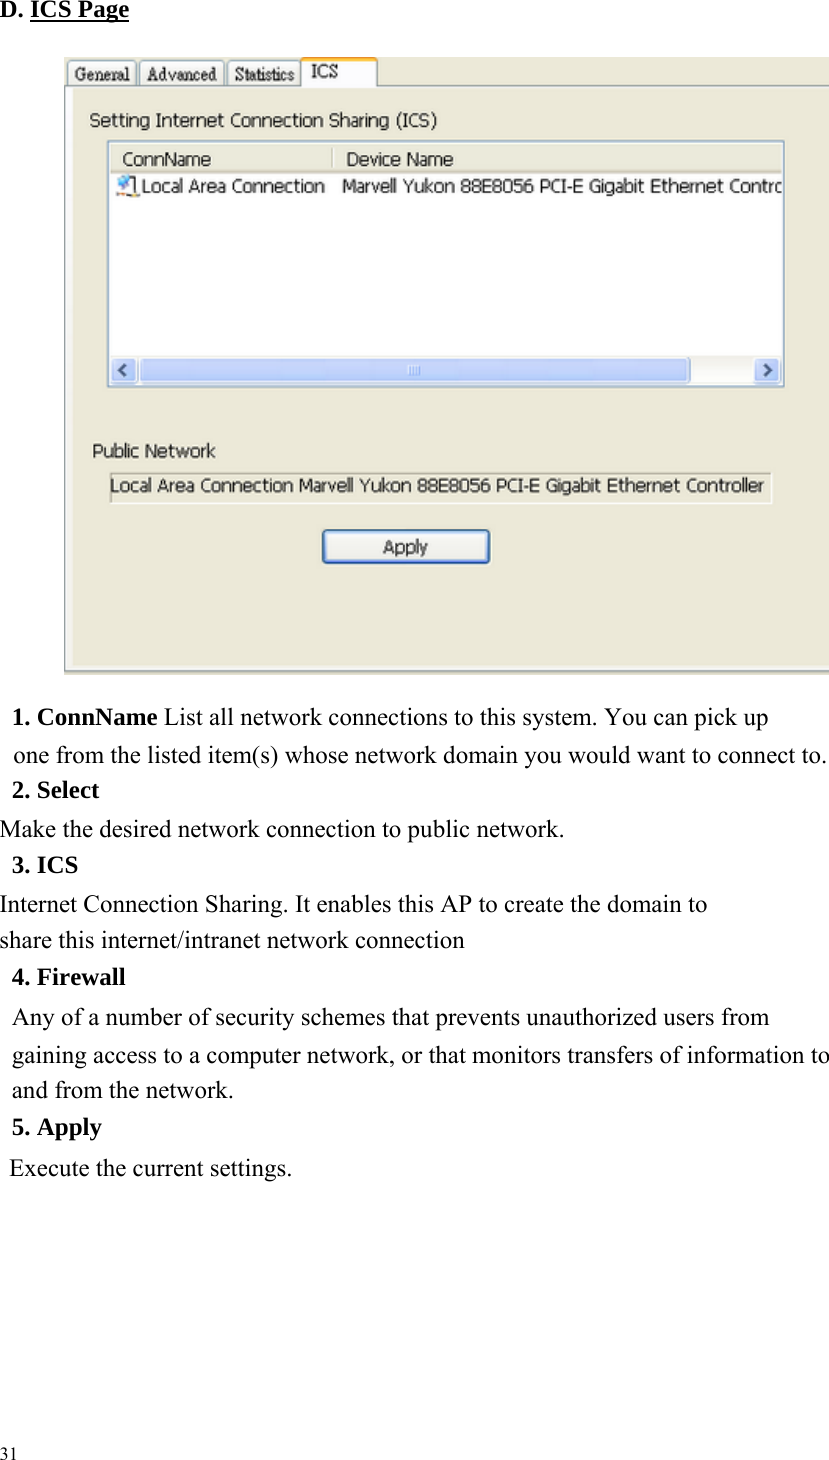   D. ICS Page                1. ConnName List all network connections to this system. You can pick up one from the listed item(s) whose network domain you would want to connect to.     2. Select Make the desired network connection to public network.     3. ICS Internet Connection Sharing. It enables this AP to create the domain to share this internet/intranet network connection     4. Firewall Any of a number of security schemes that prevents unauthorized users from gaining access to a computer network, or that monitors transfers of information to and from the network.     5. Apply   Execute the current settings.             31 